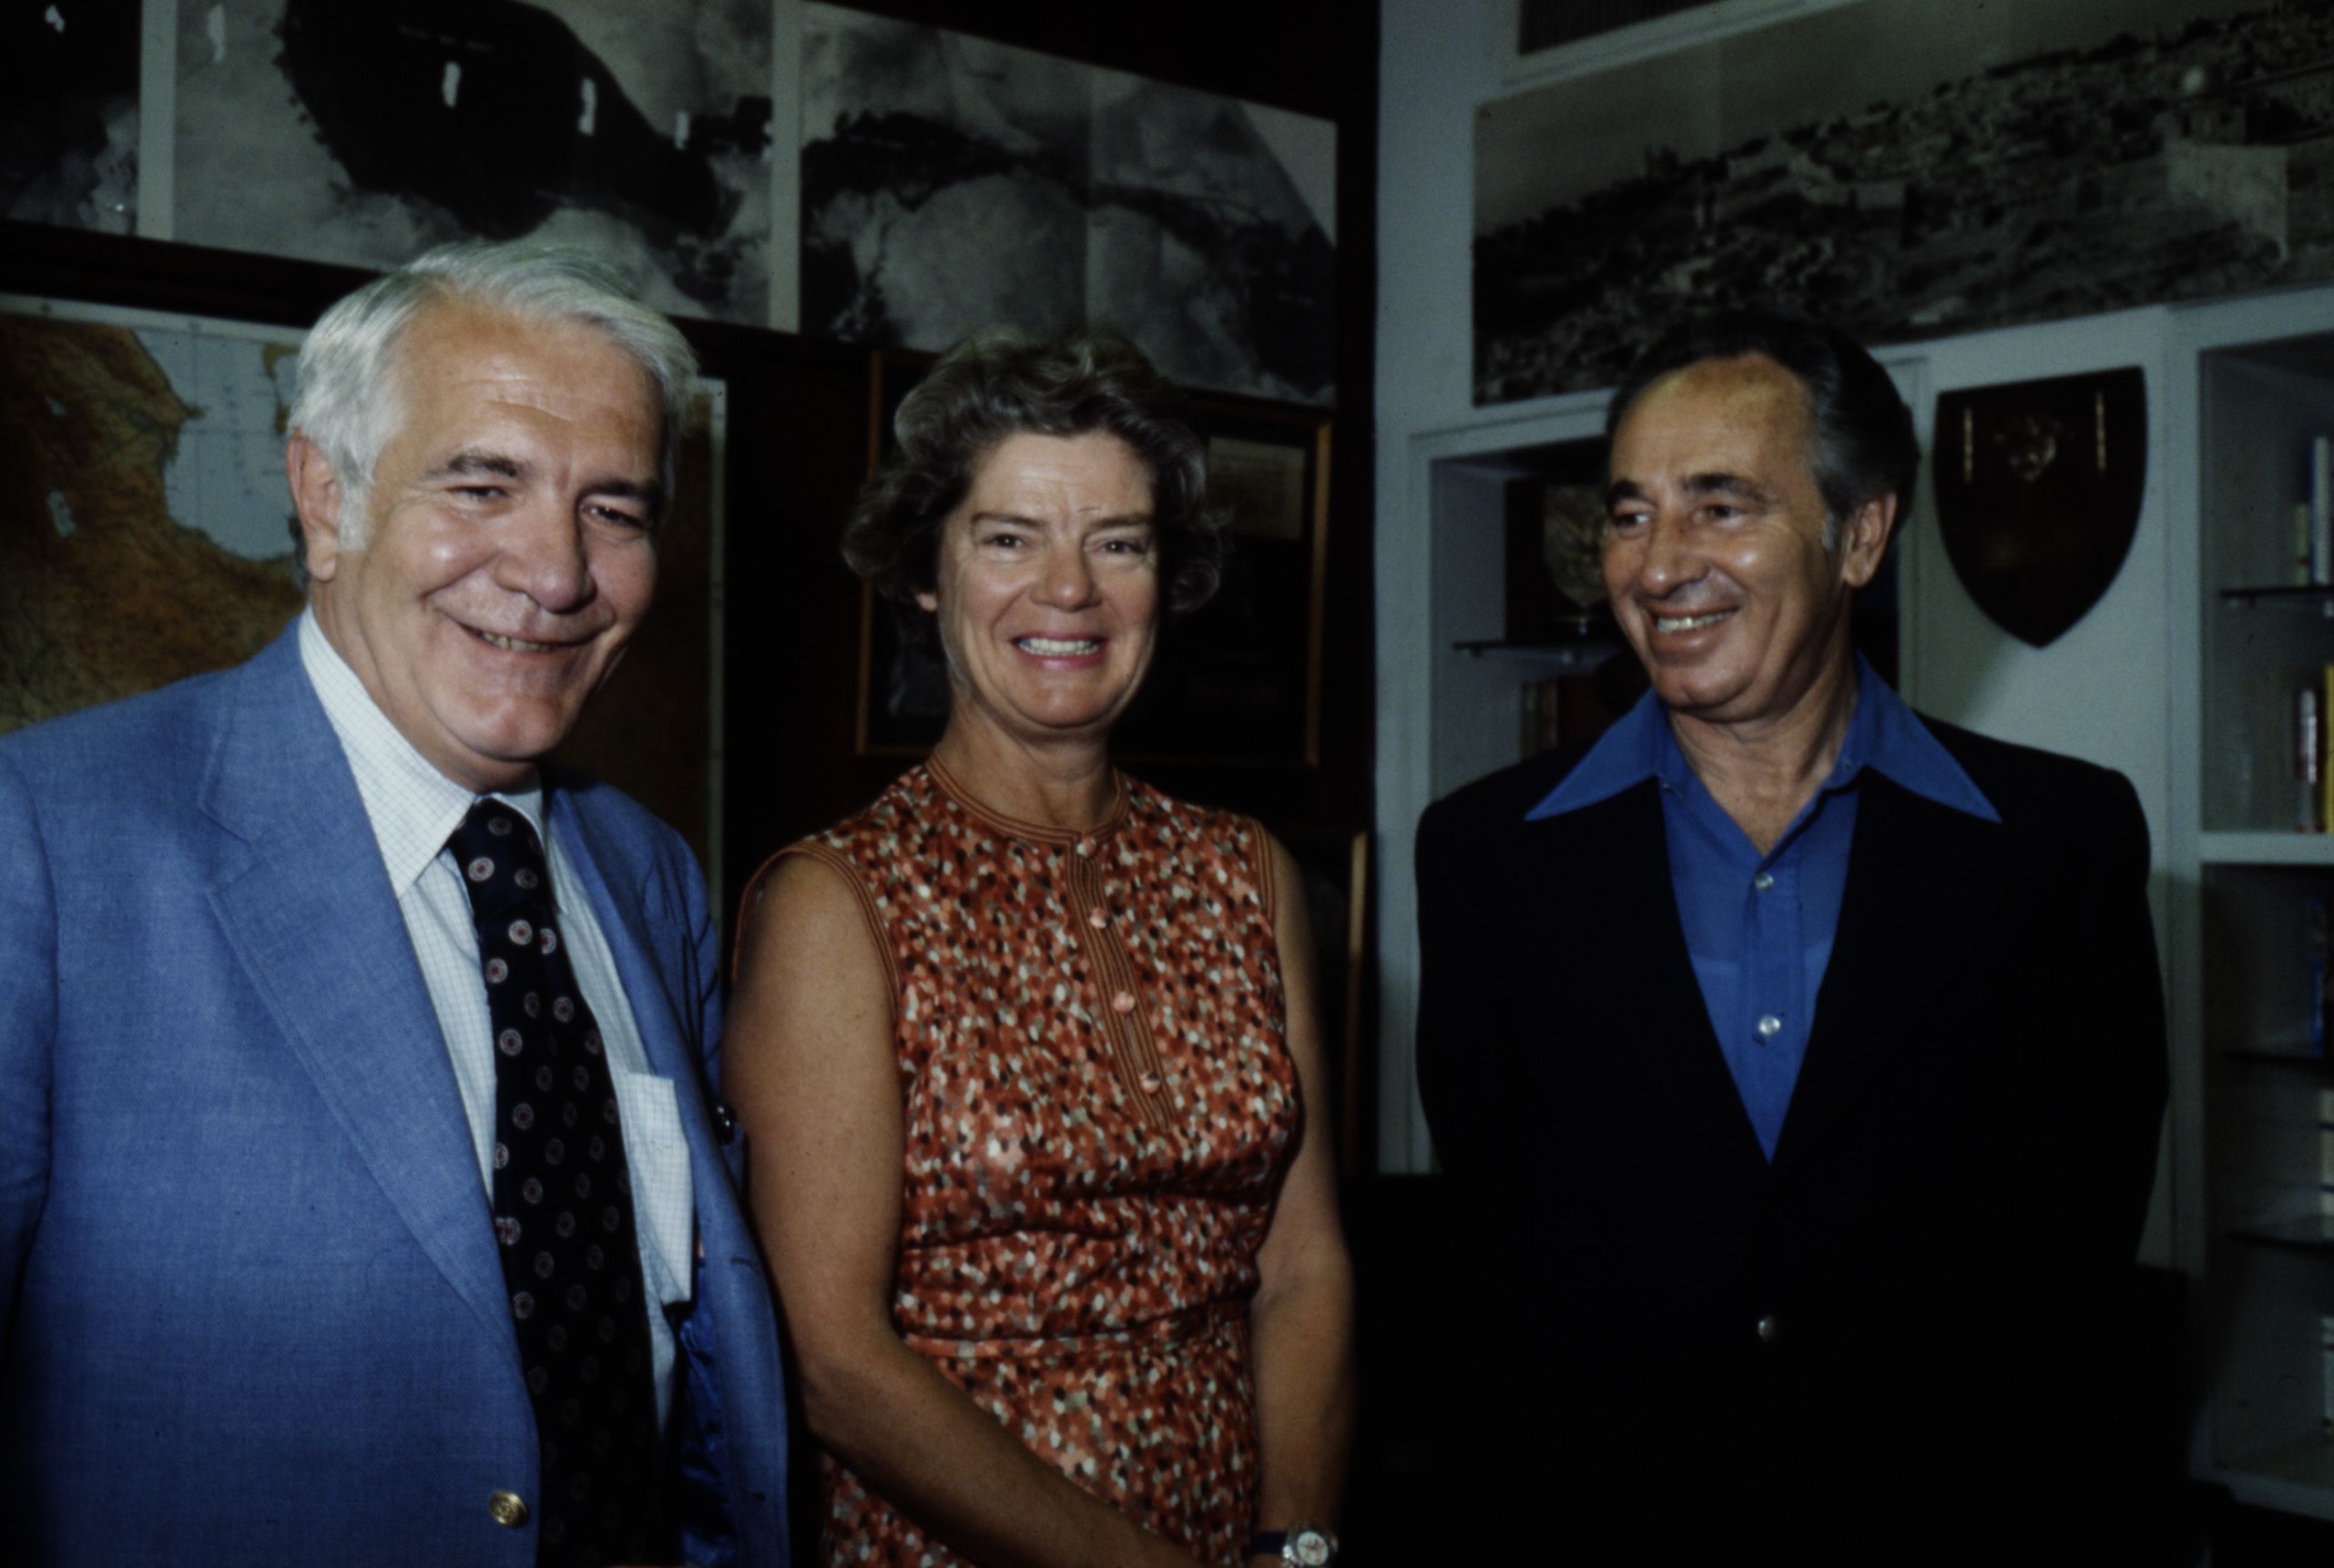 Harry Reasoner, Kathleen Carroll Reasoner, and Israeli President Shimon Peres posing together for ABC News circa 1977 | Photo: Disney General Entertainment Content/Getty Images